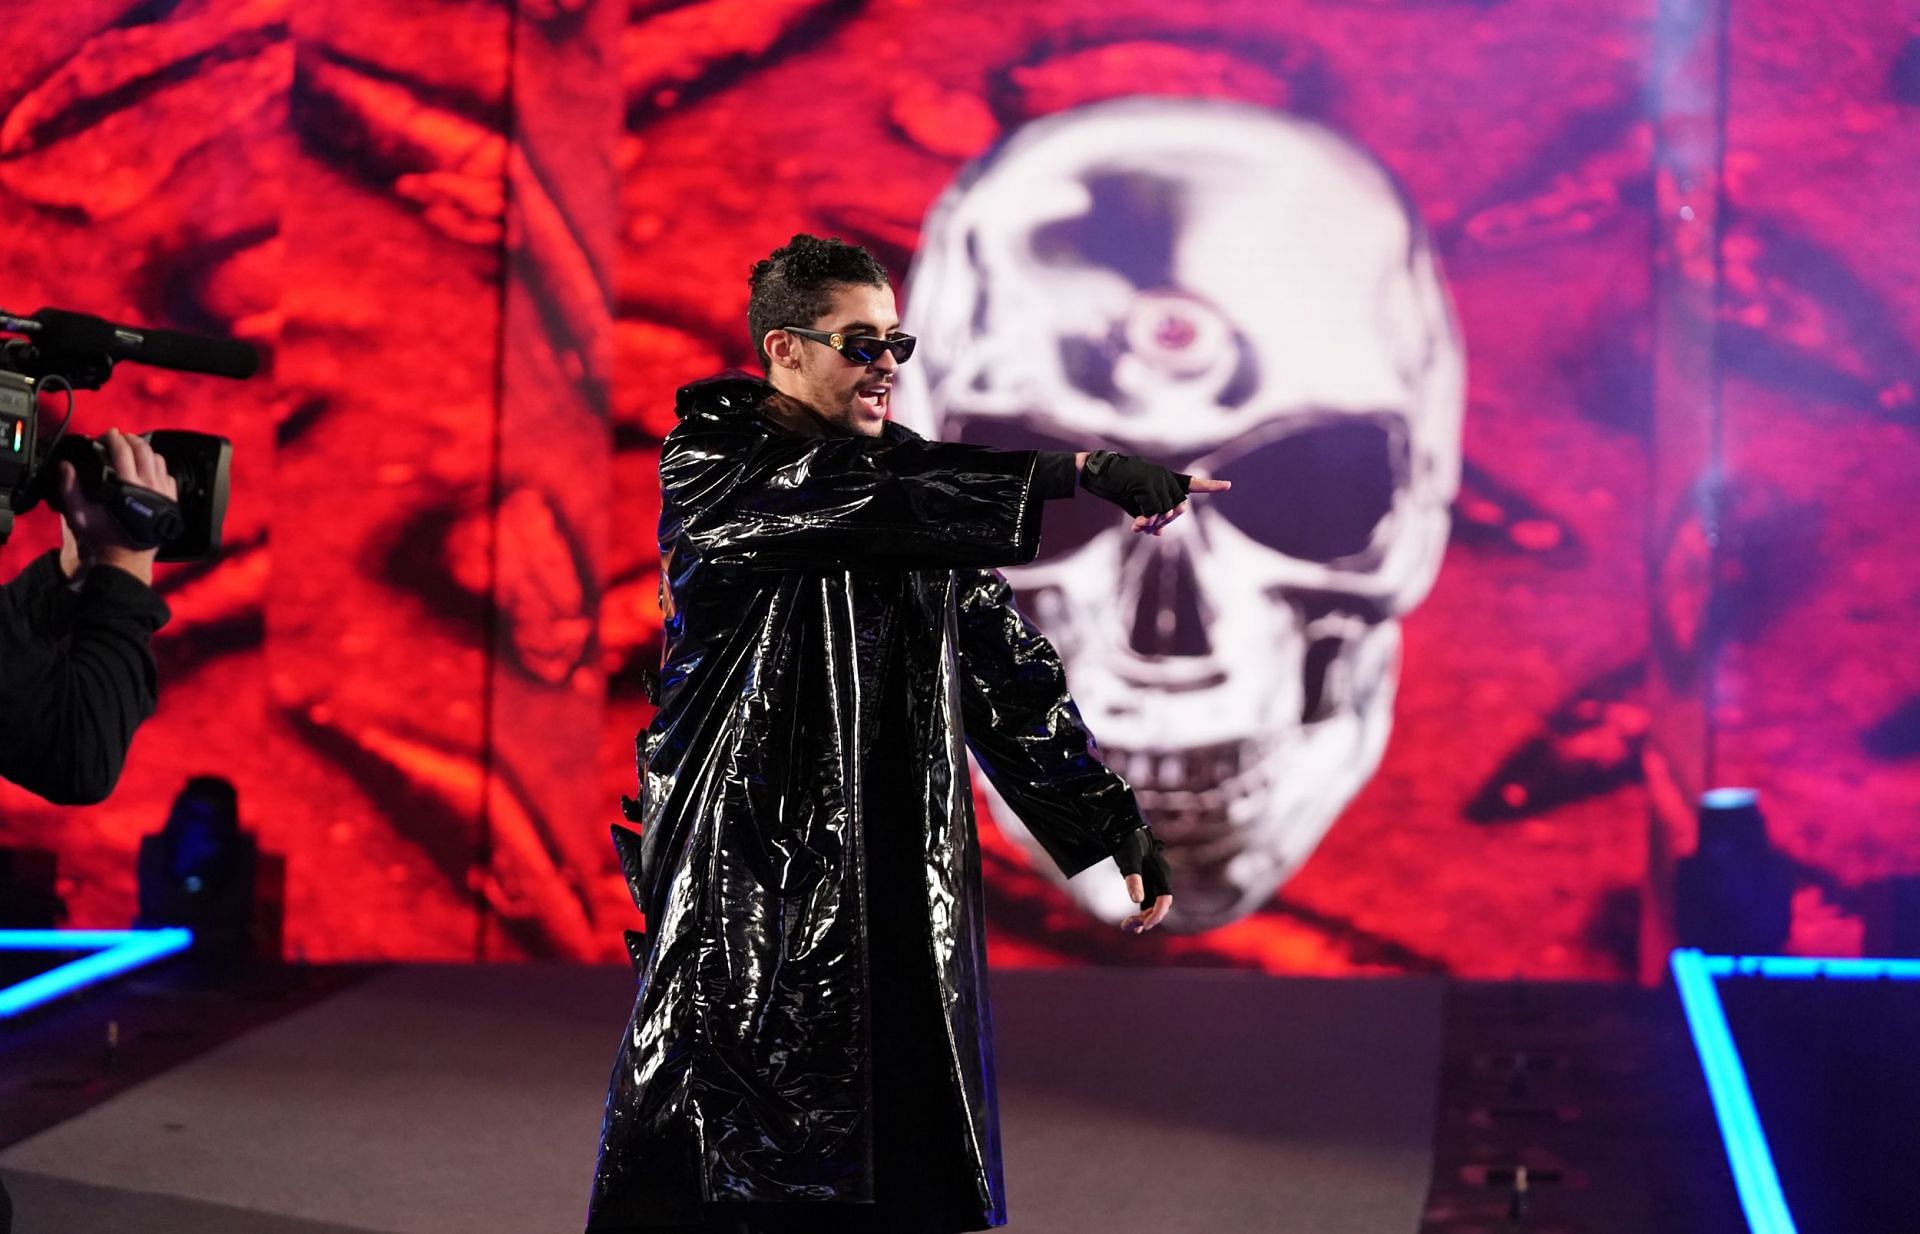 Bad Bunny talked about how badly he wanted to be a part of WWE during the pandemic